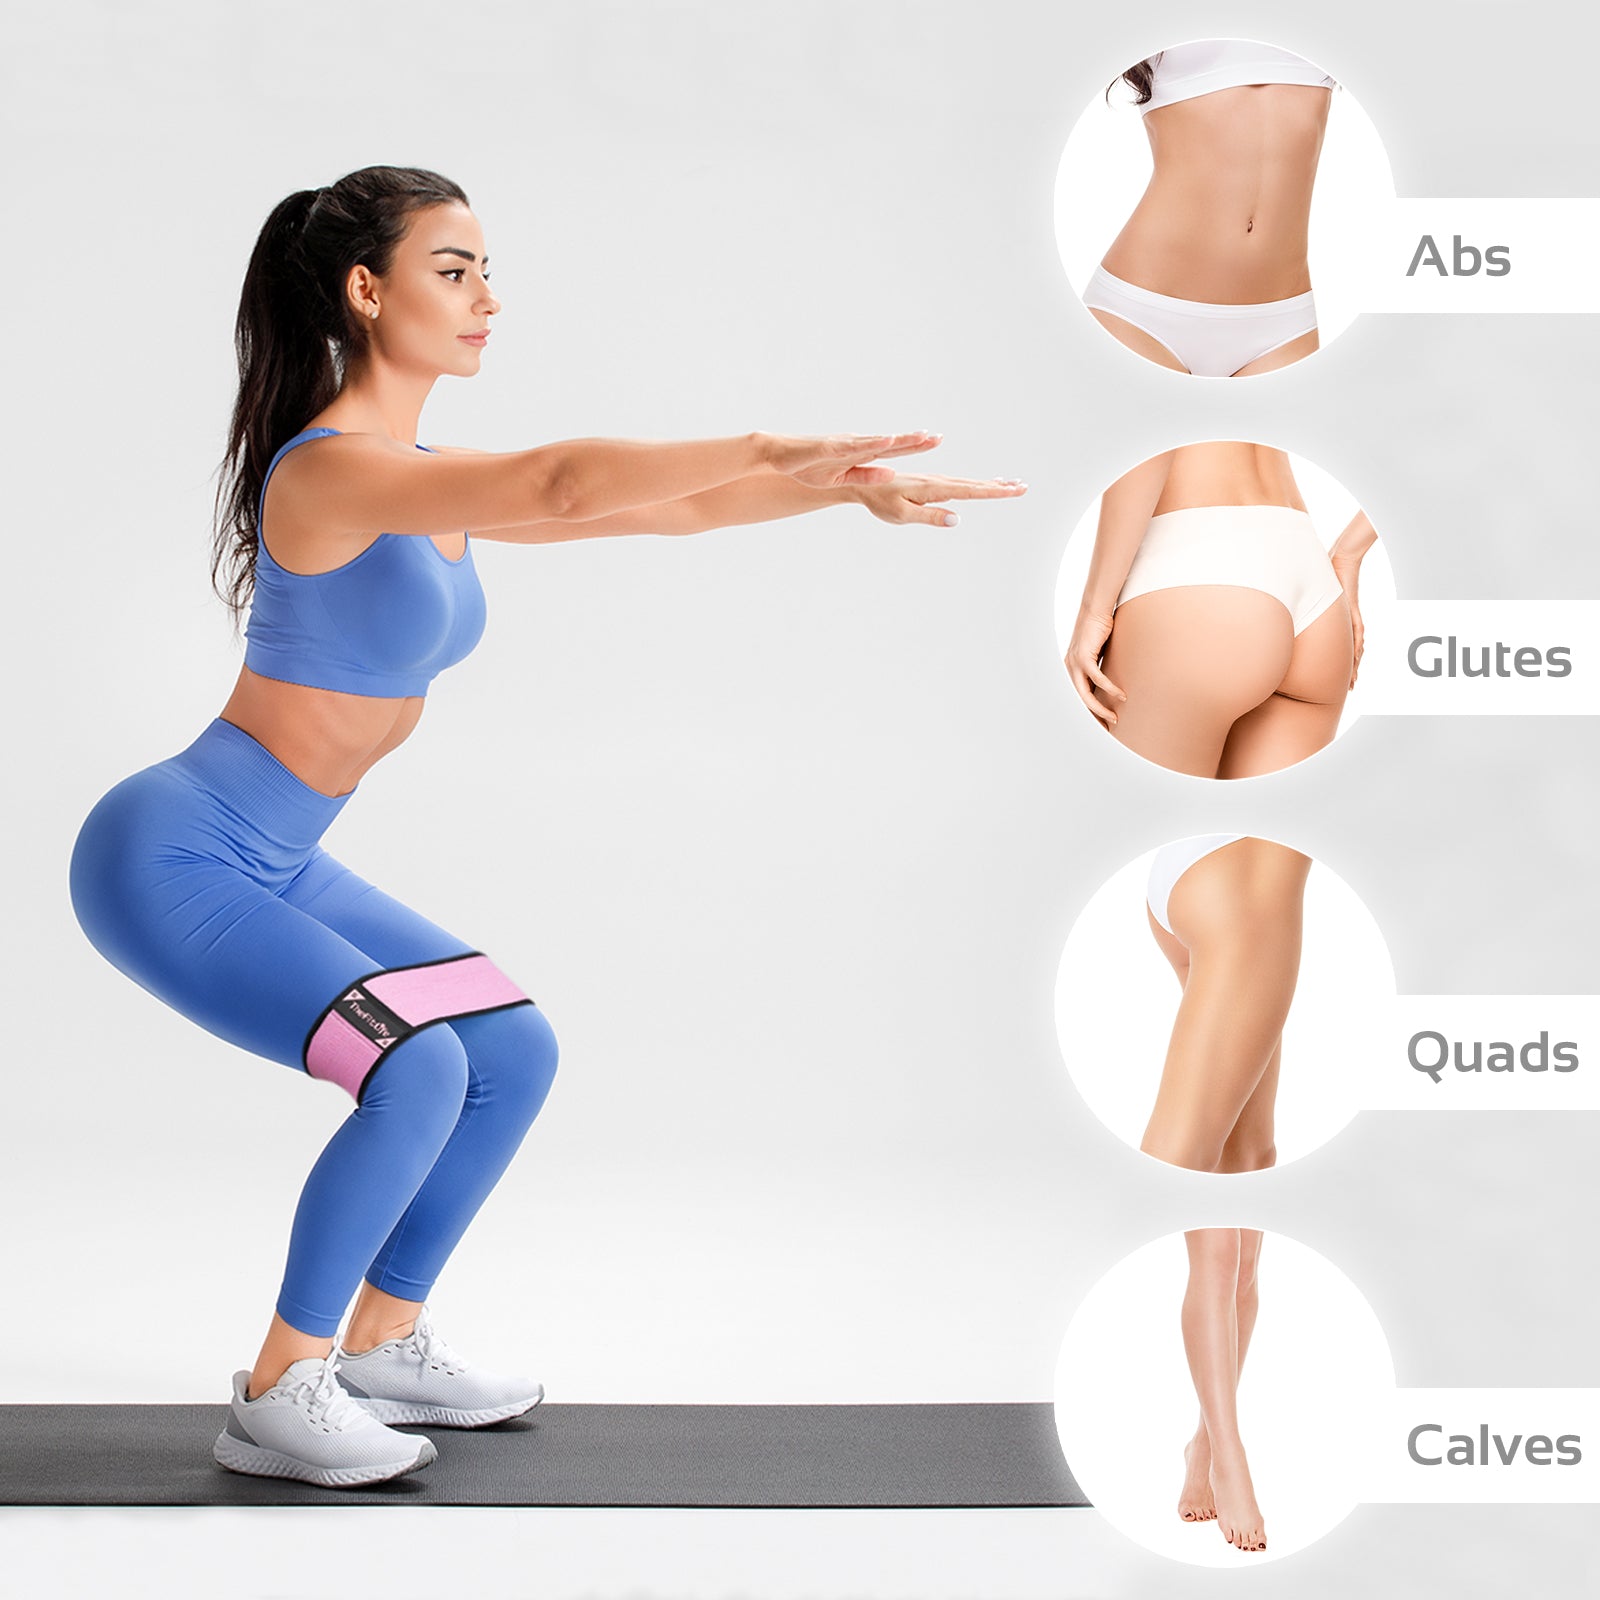 Healthy Lifestyle/Fitness - Fitness for Women - Booty Bands